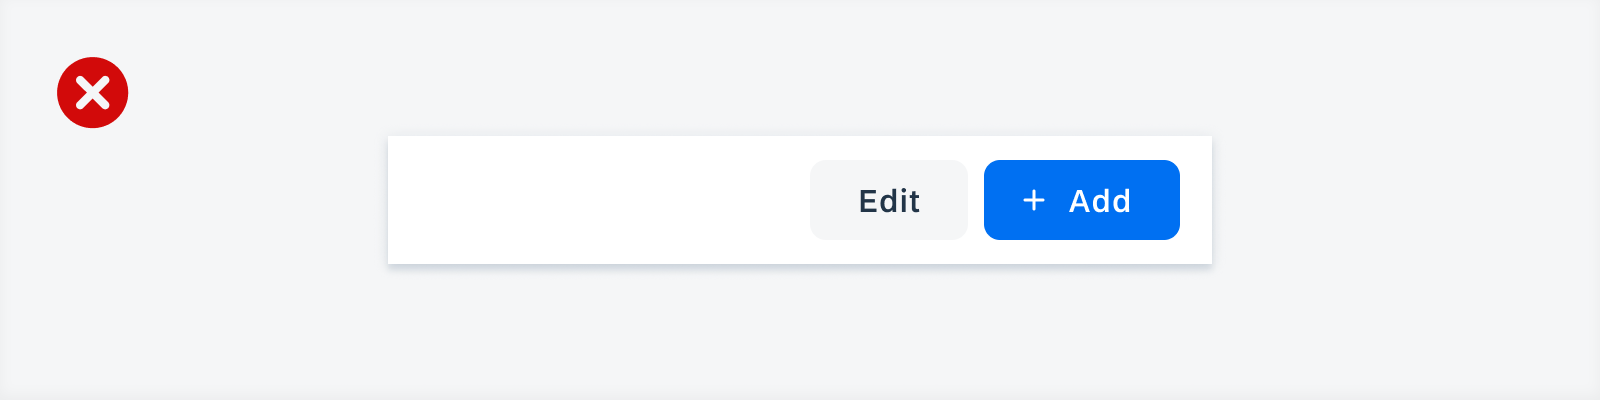 Negative example of using a contained text button and a contained button with text and an icon for related actions